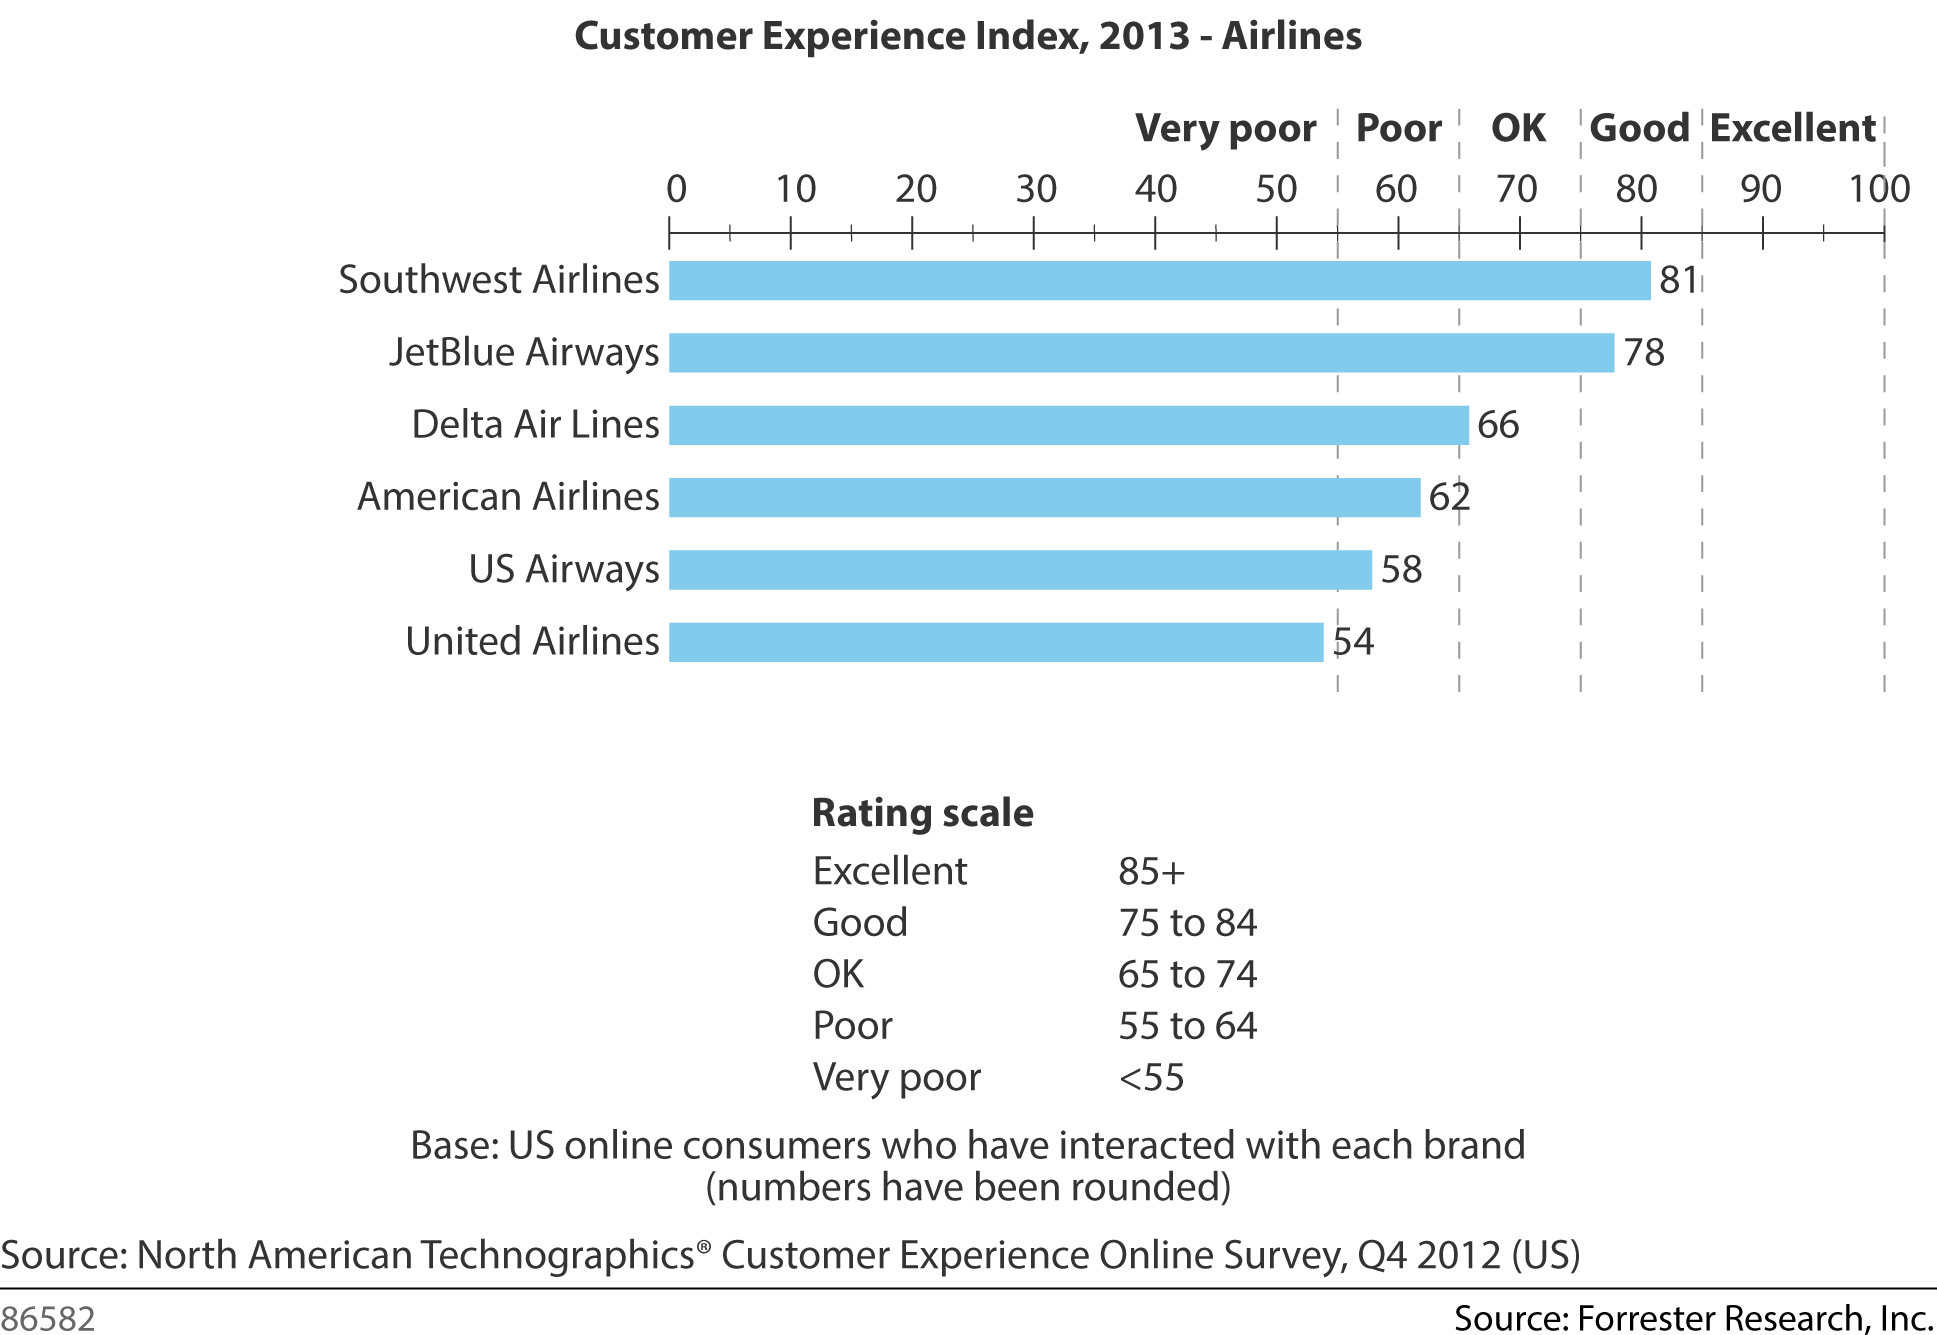 Forrester Customer Experience Index - 2013 - Airlines